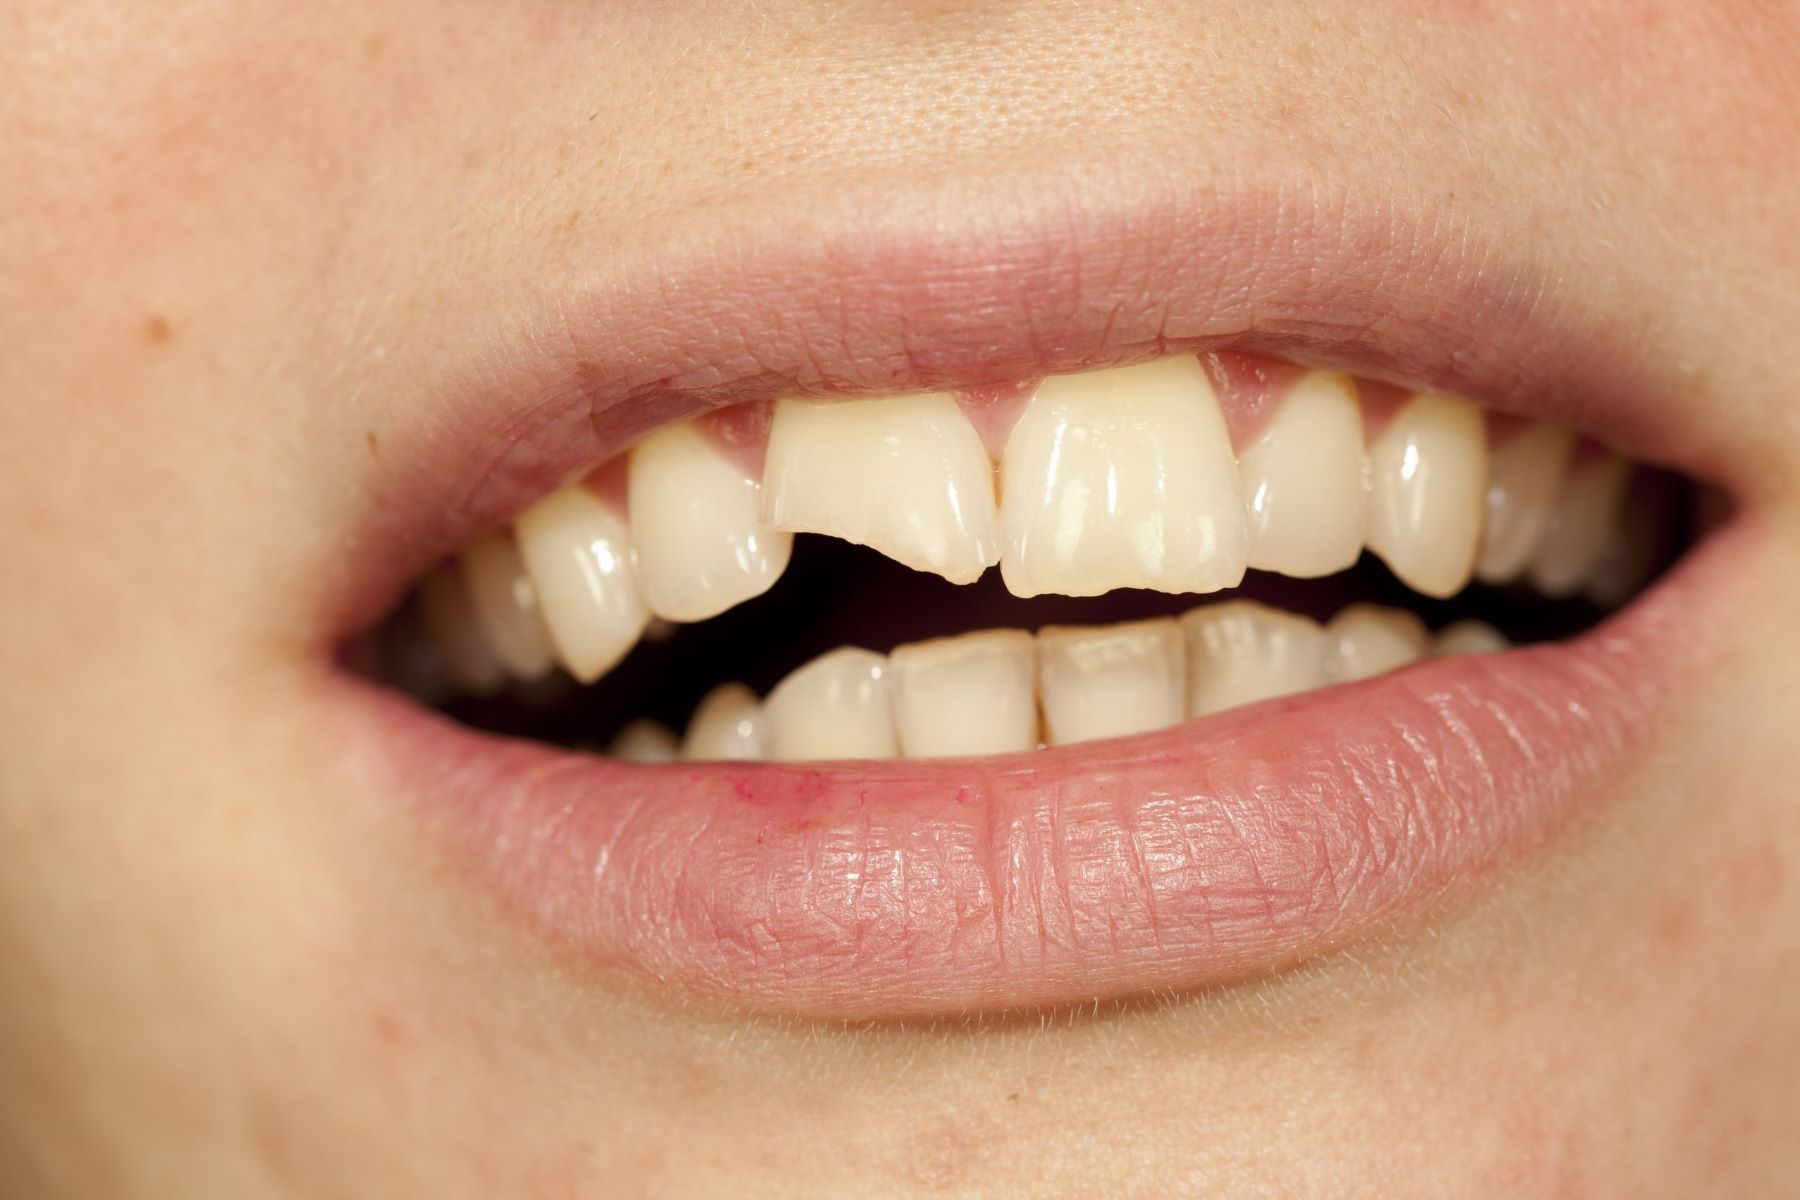 Amazing Natural Remedies To Fix Cracked Front Teeth!